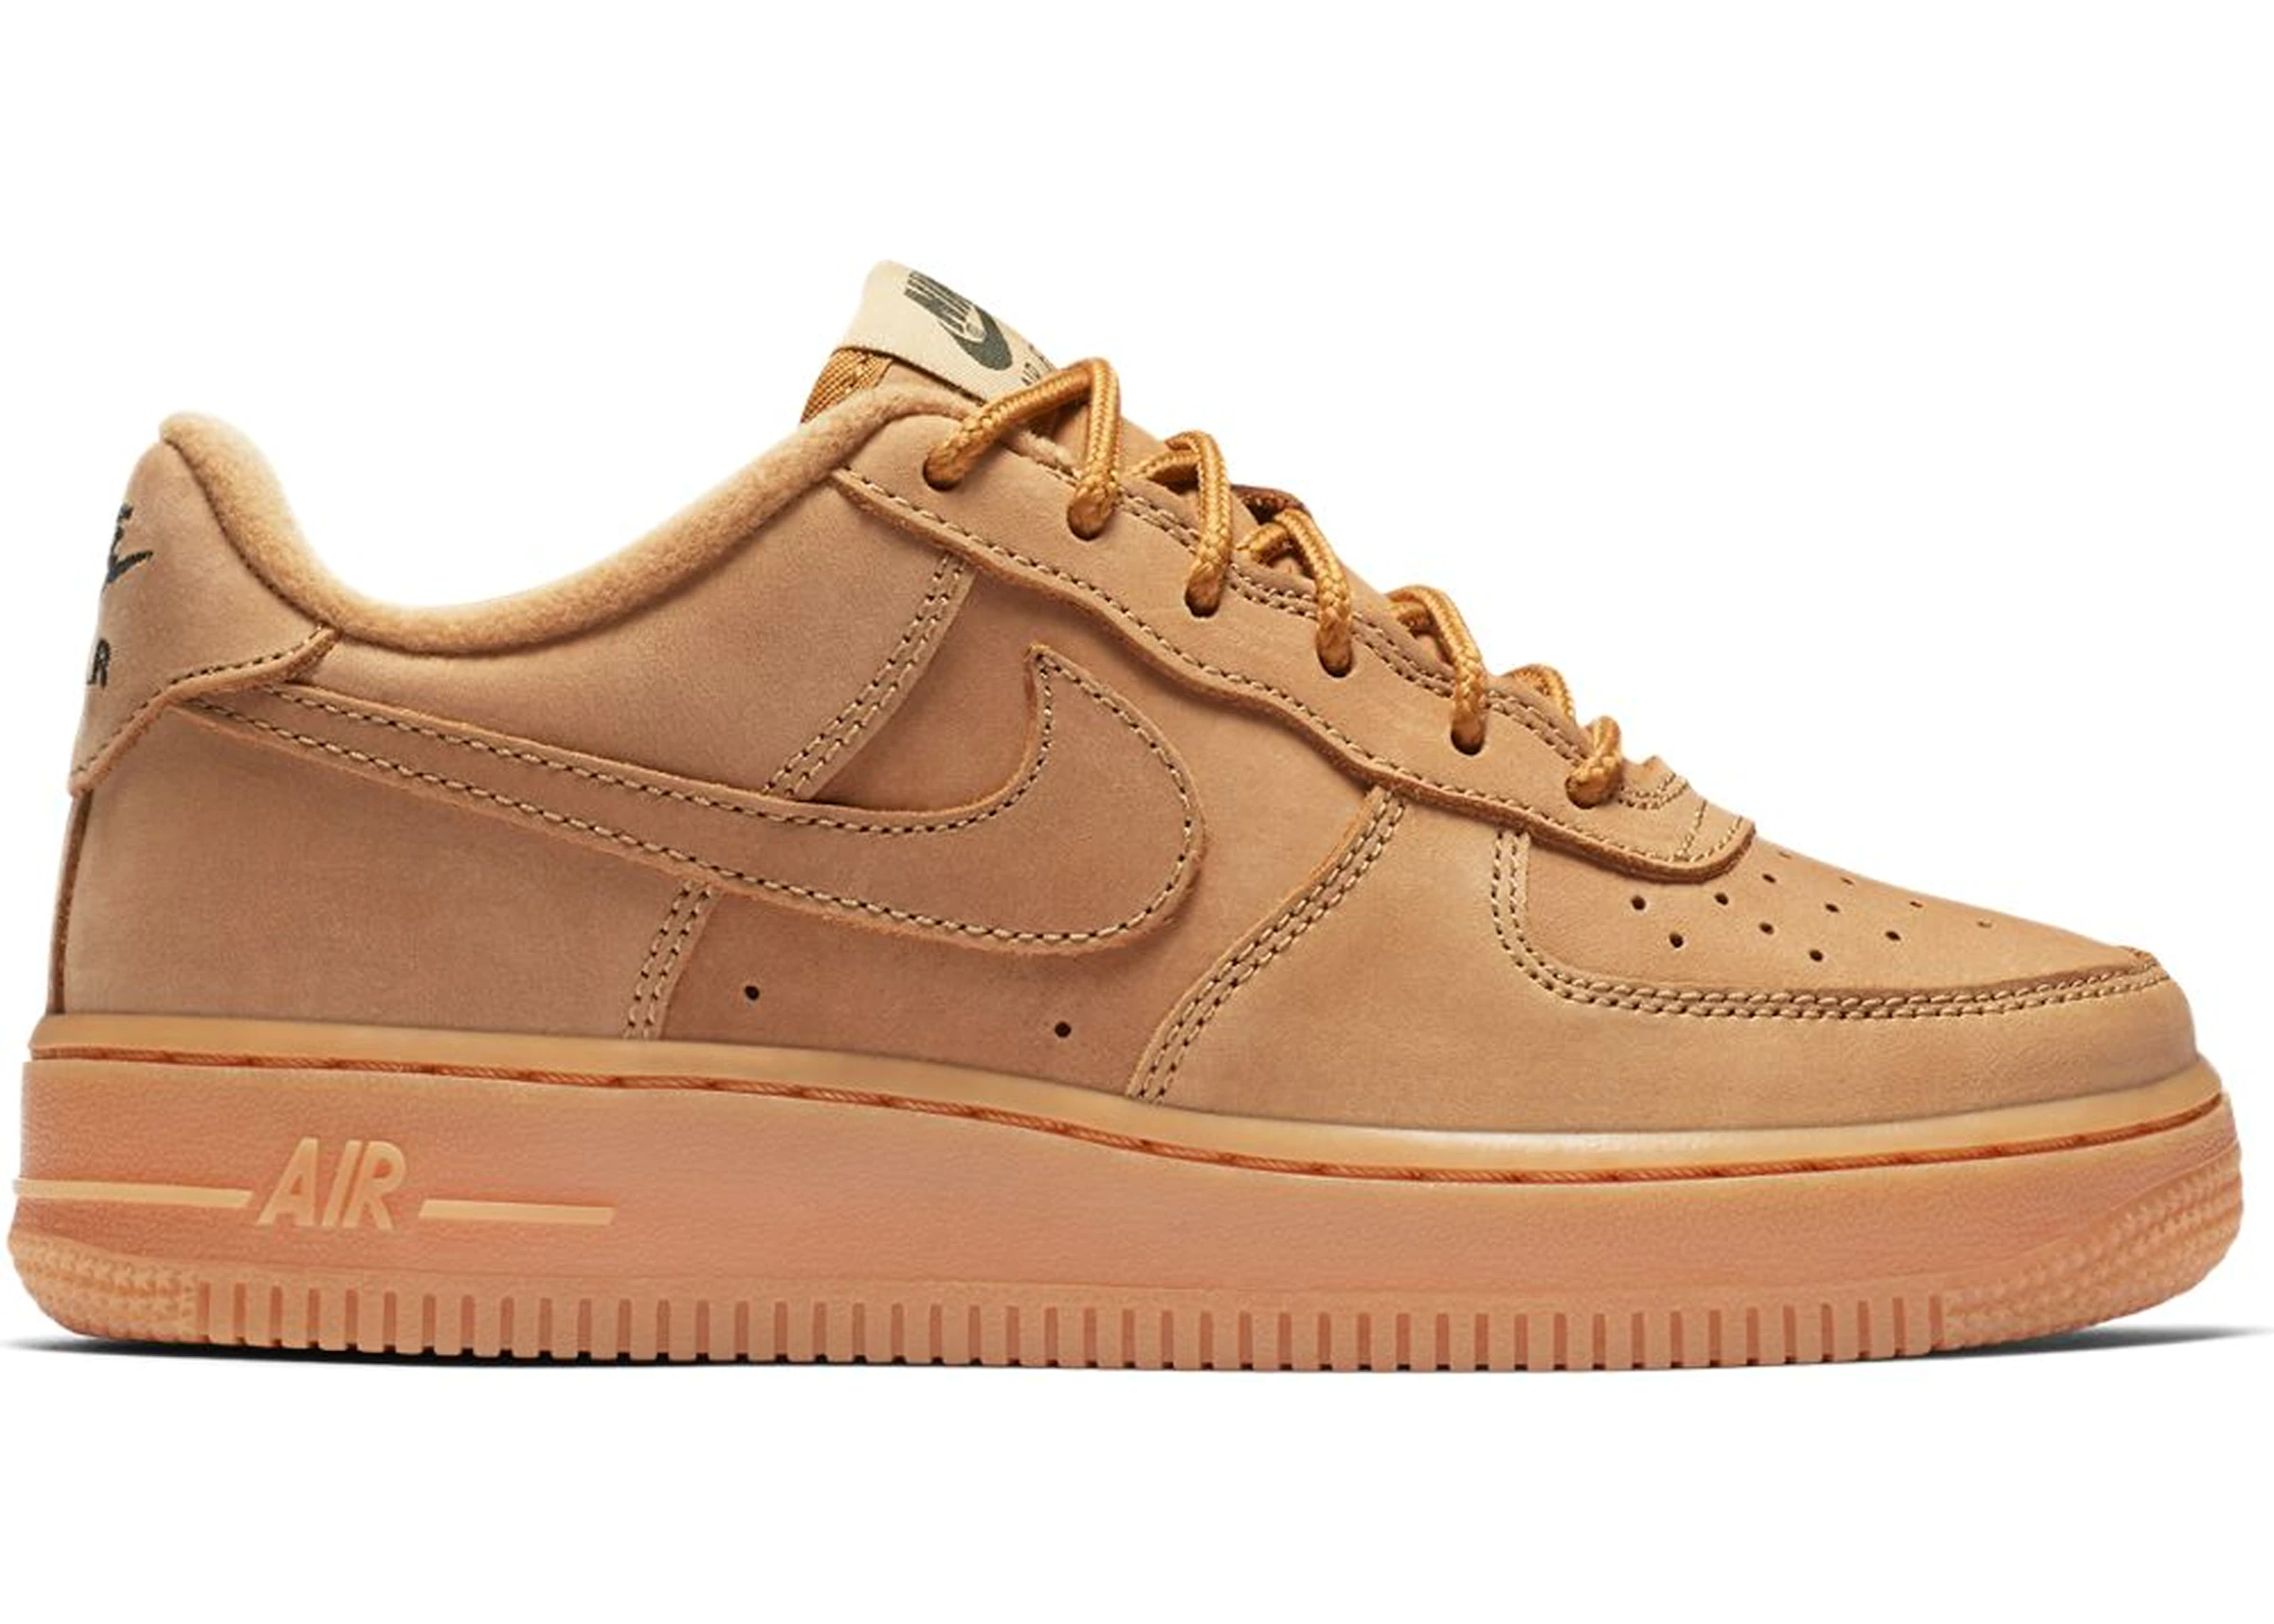 Torches slim Defile Nike Air Force 1 Low Winter Flax (GS) - 943312-200 - US